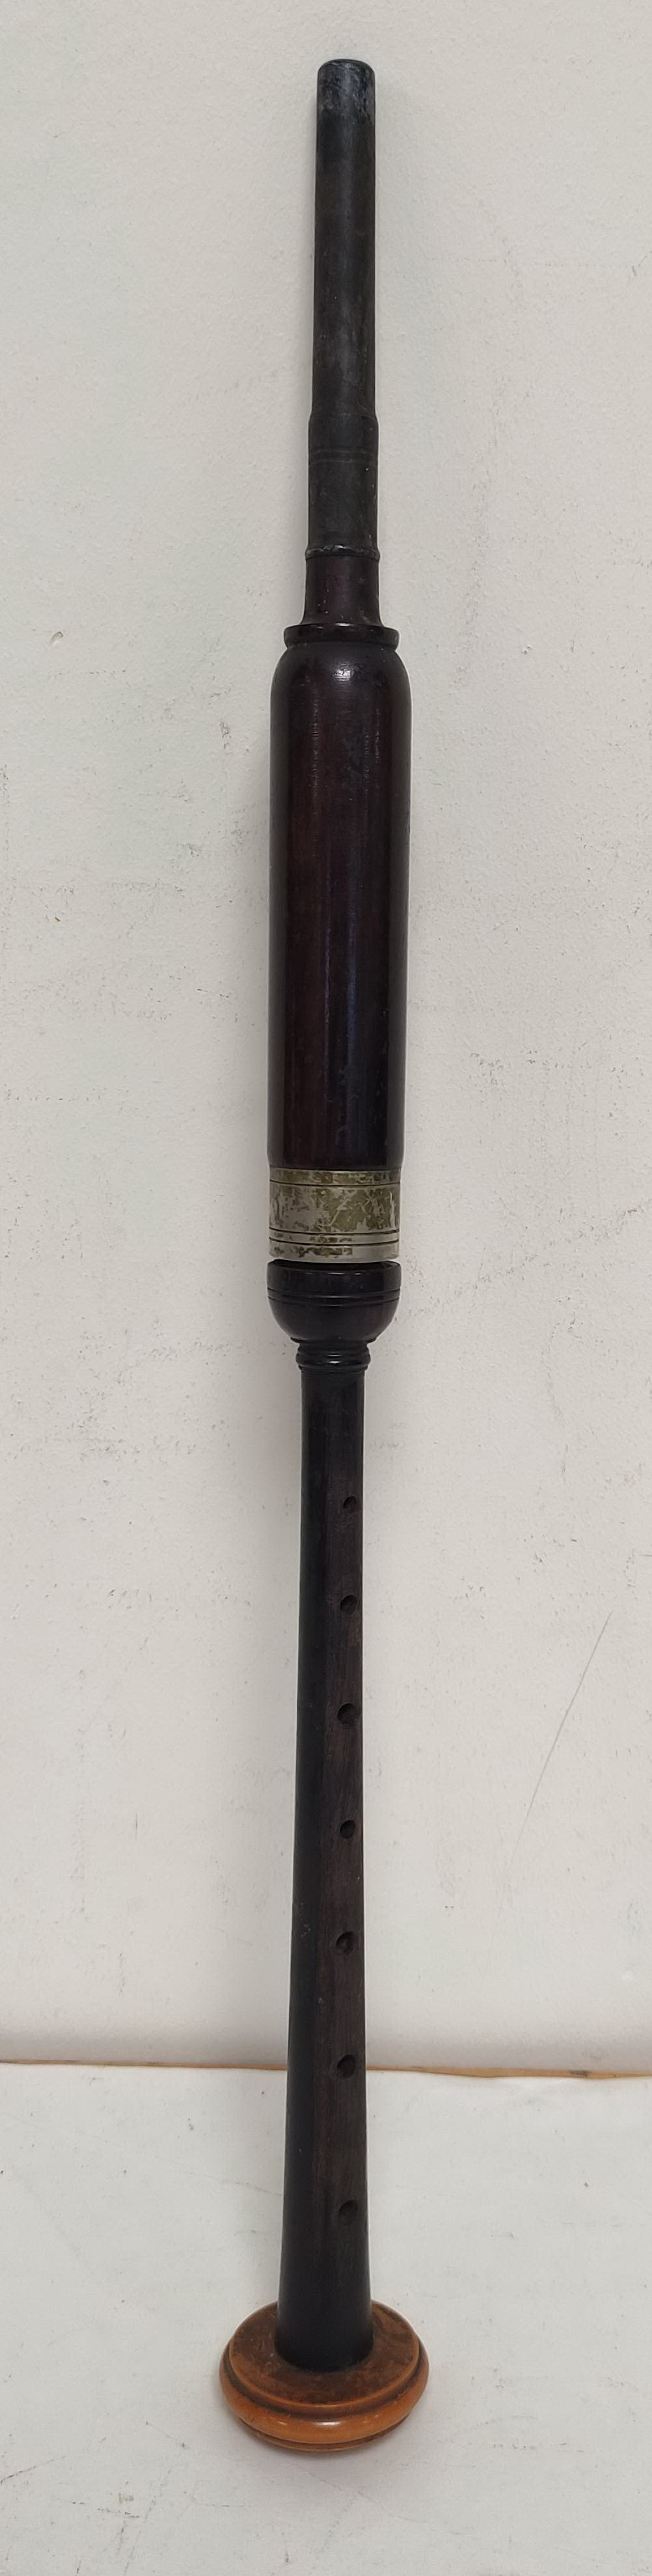 Antique rosewood chanter by R.G Hardie of Glasgow.